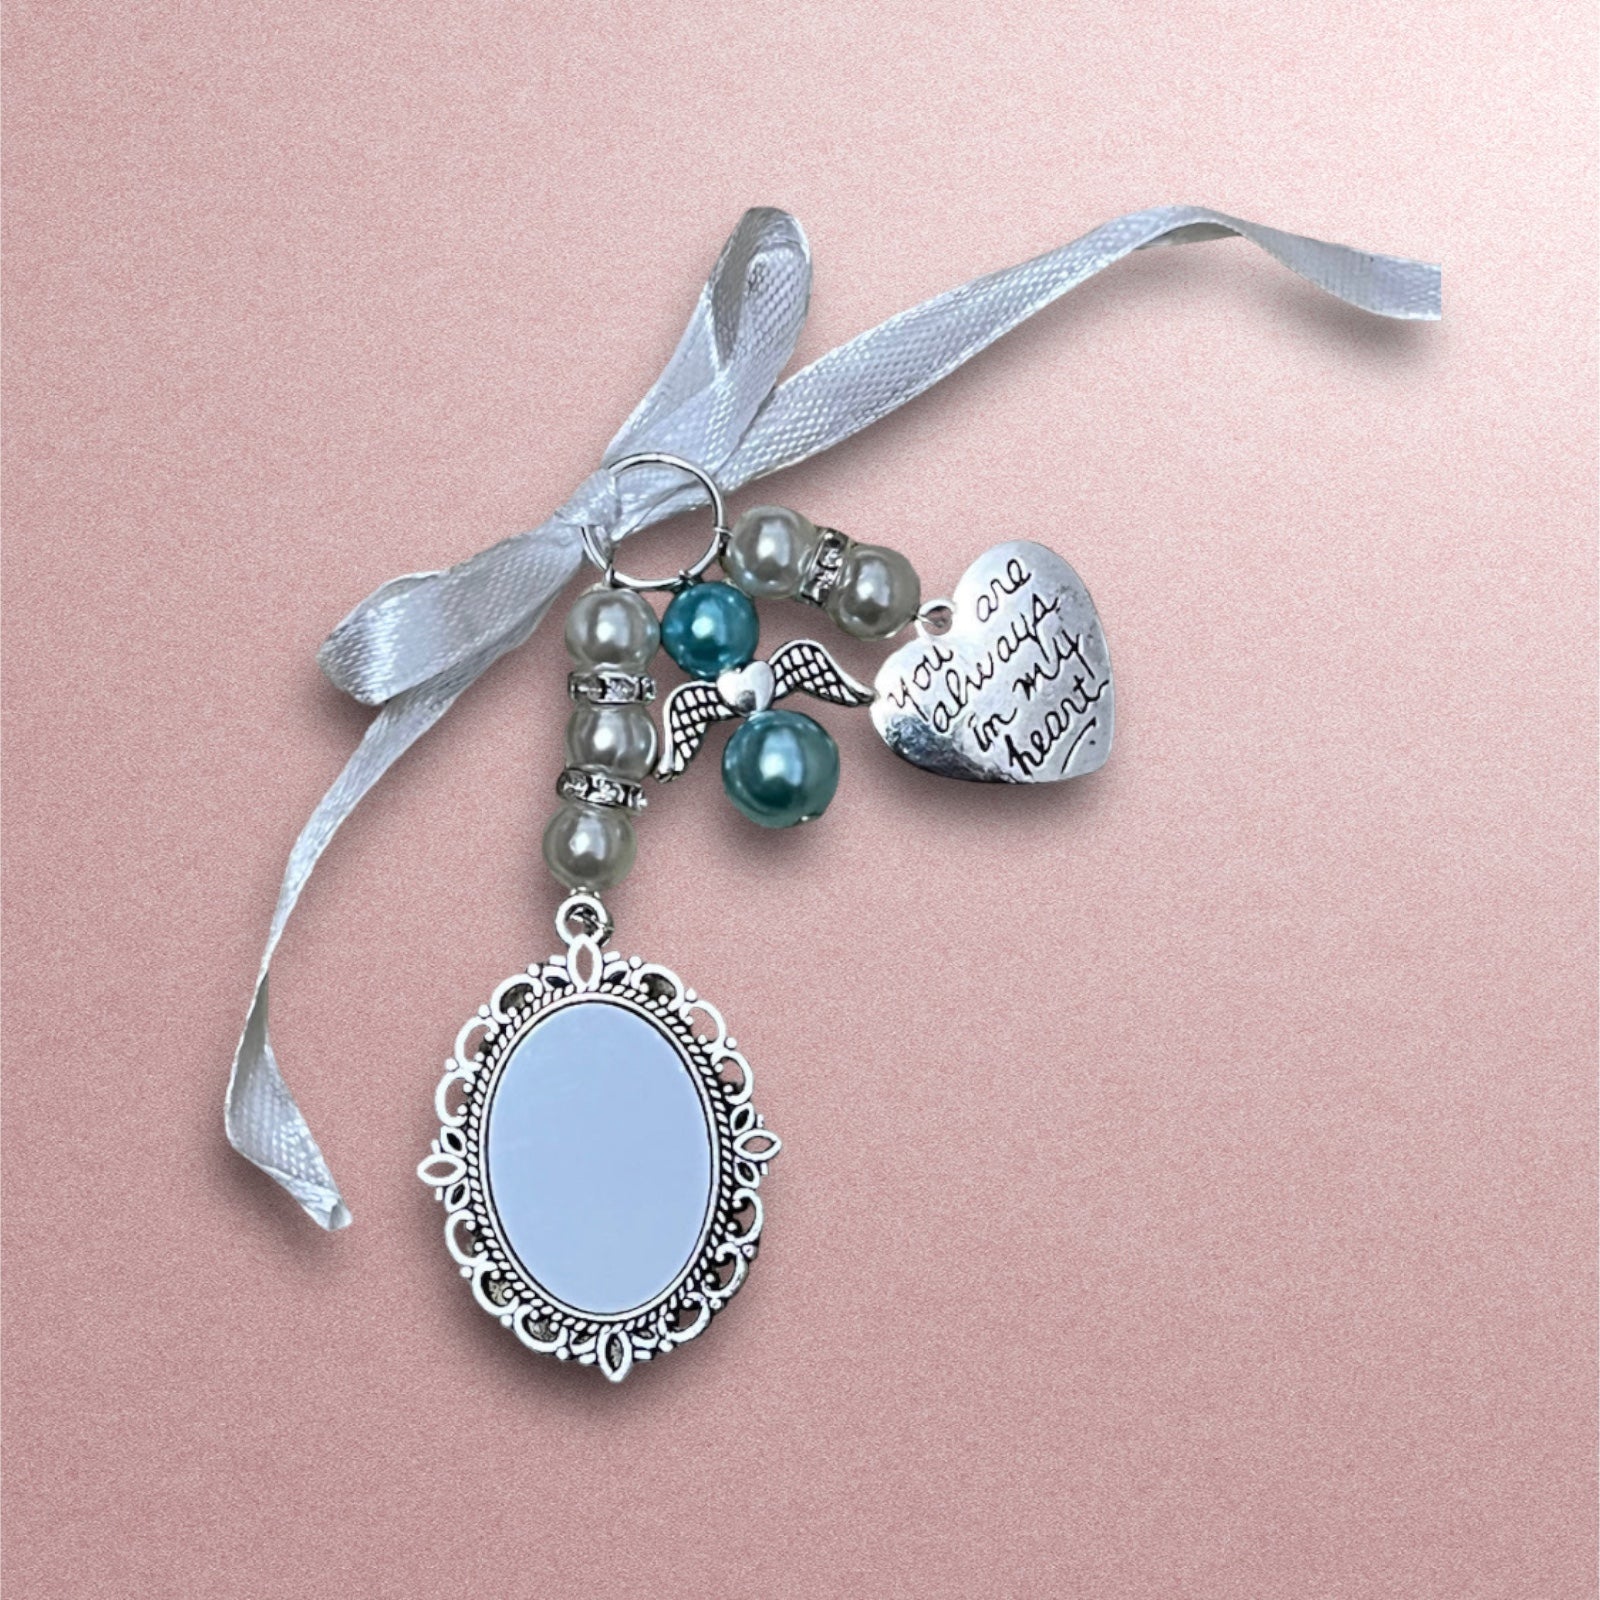 Bouquet Charms - Initial Bouquet Charm - Your choice of bead color